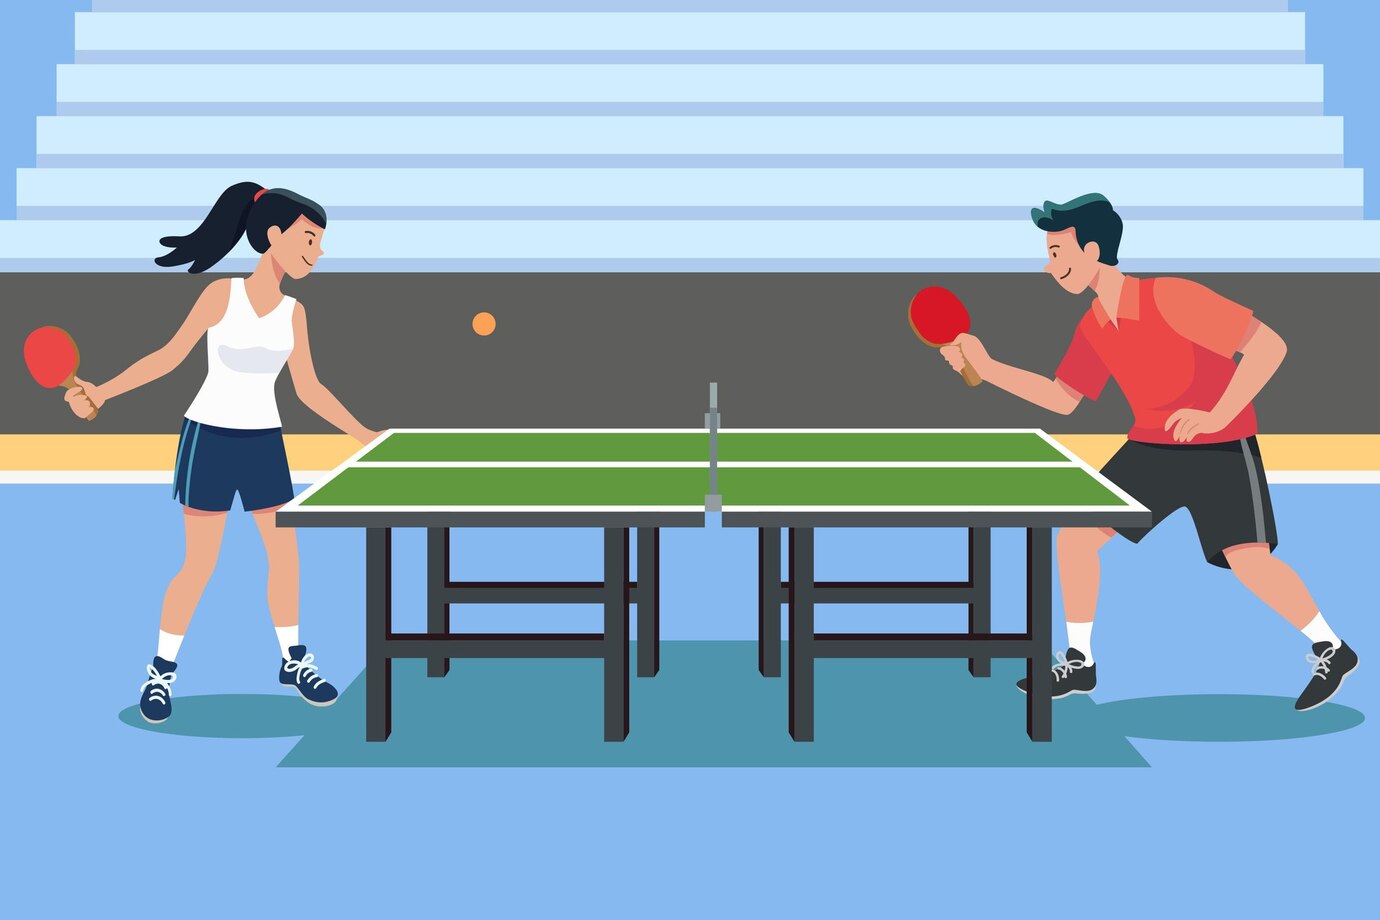 Table tennis betting: strategies for doubles matches